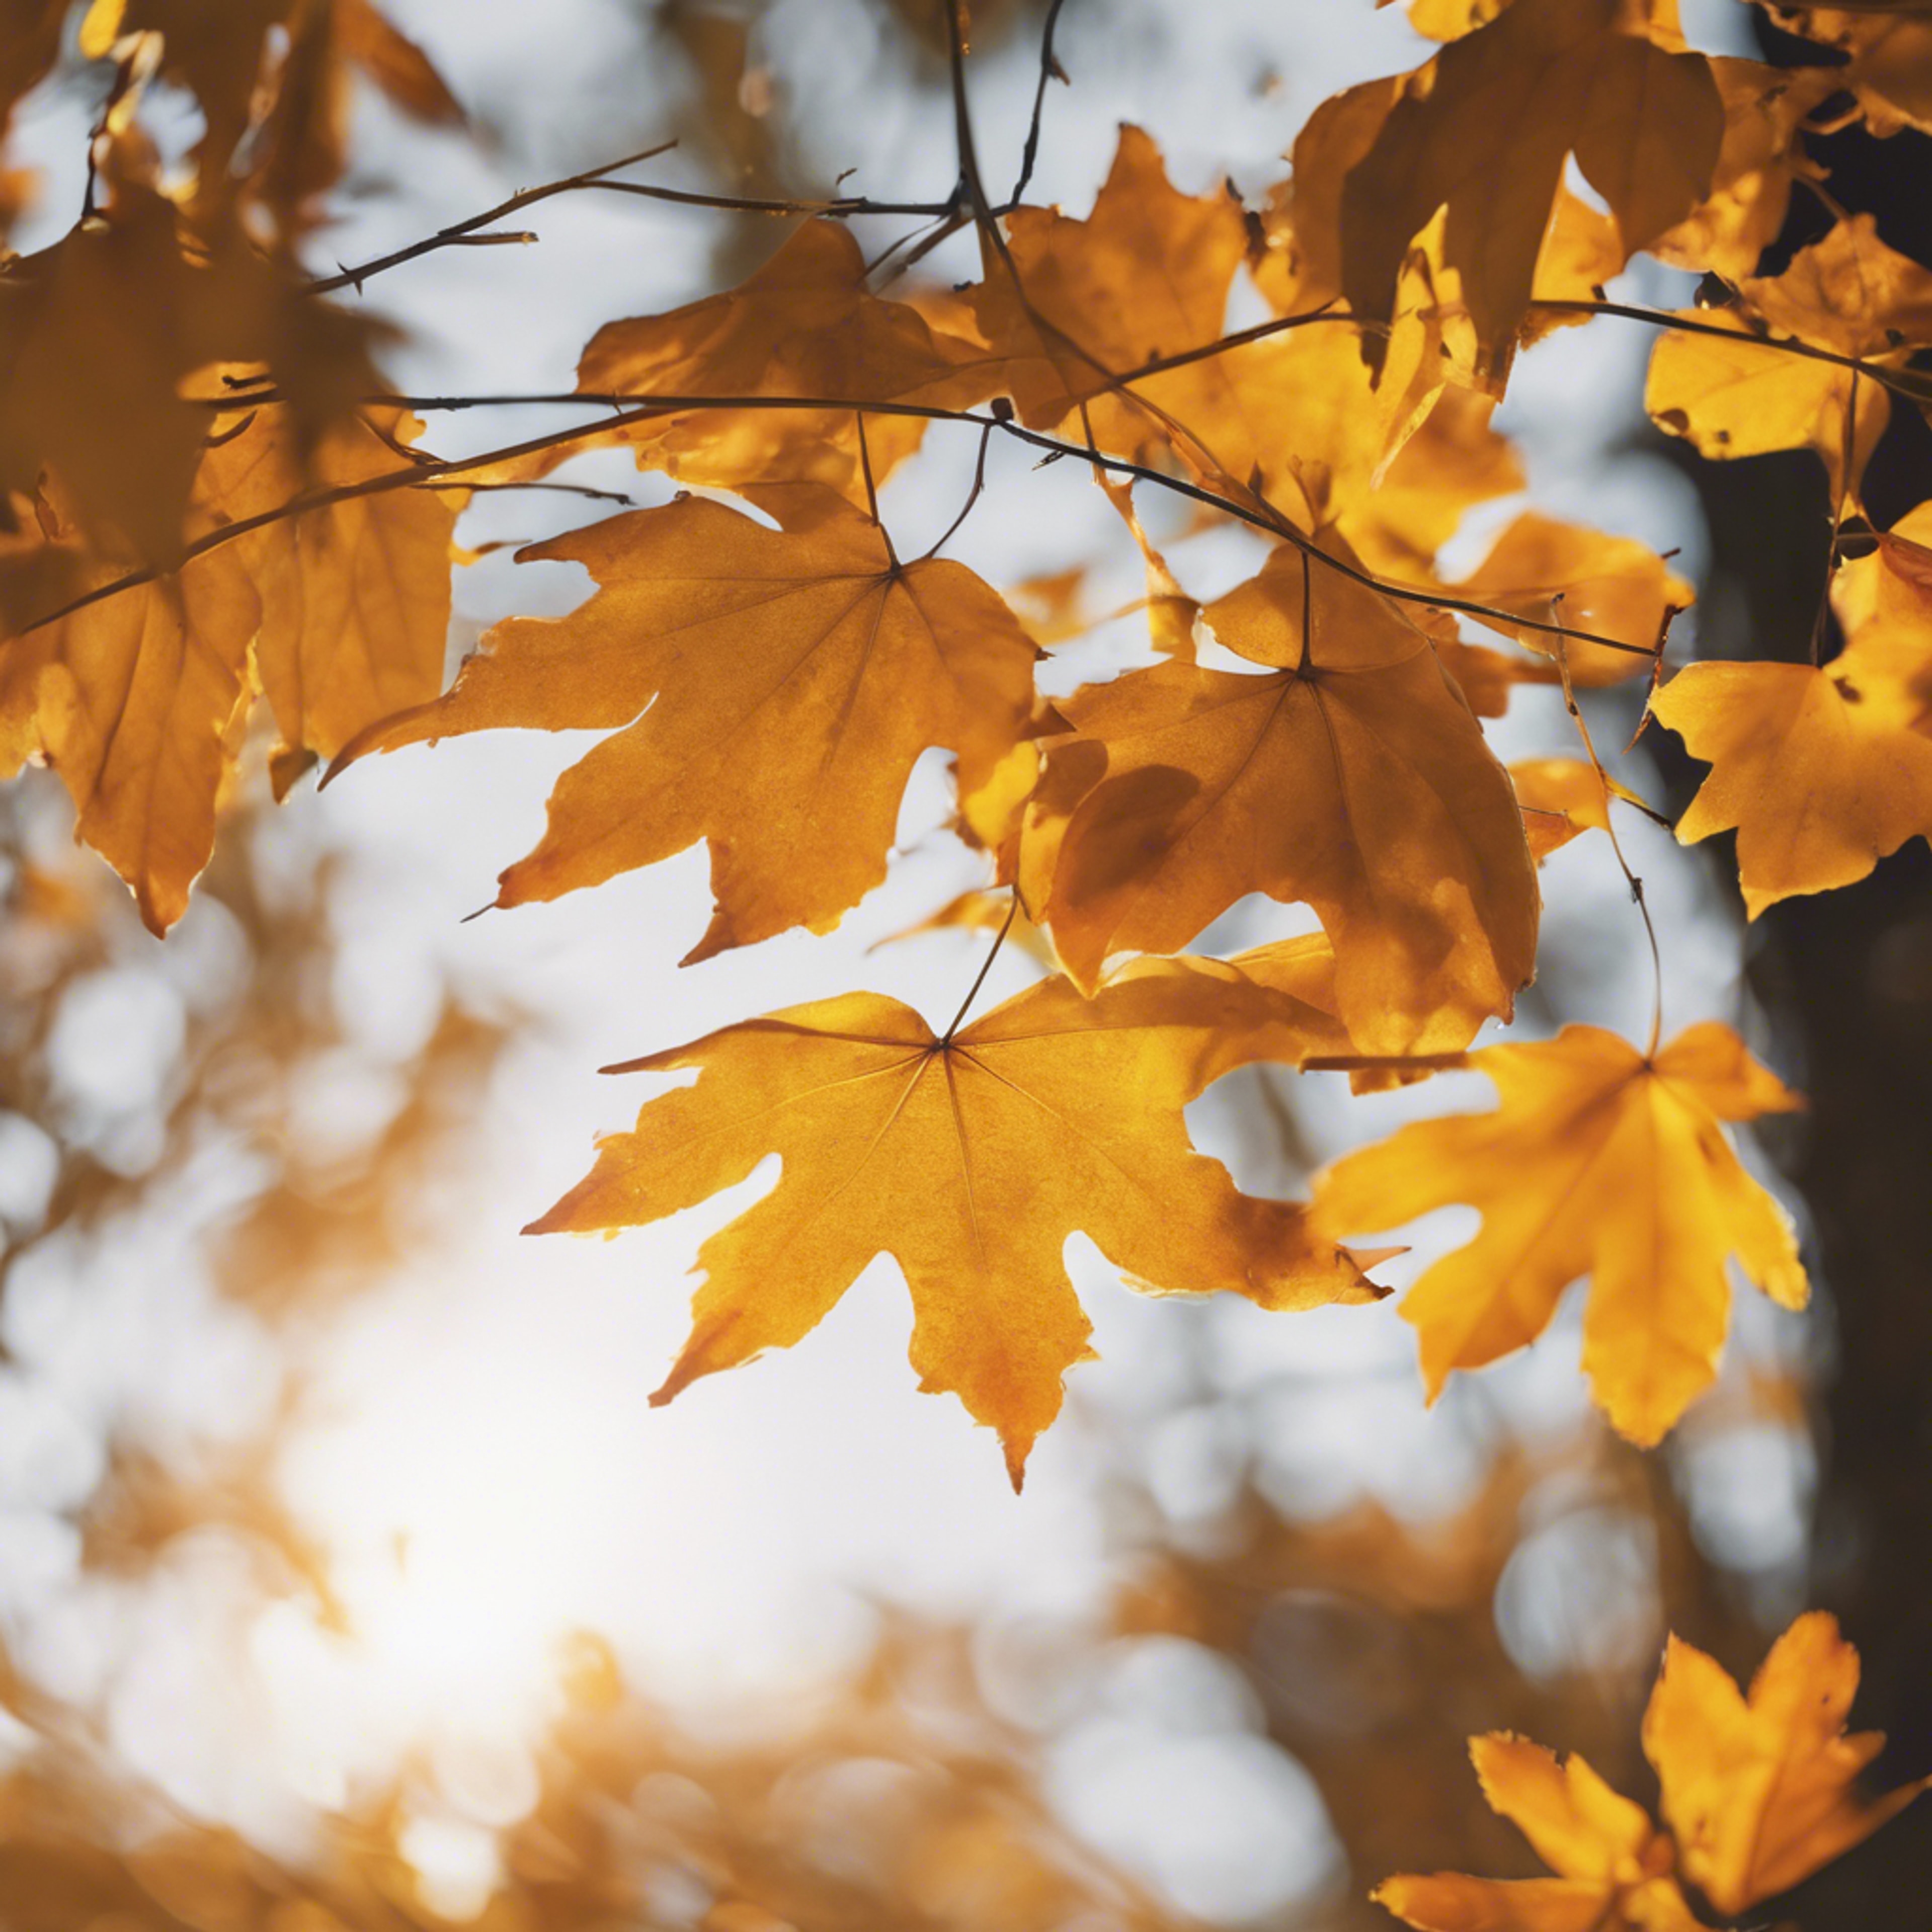 A close look at yellow-orange fall leaves, with the light streaming through. Тапет[f7b27726e627433697dc]